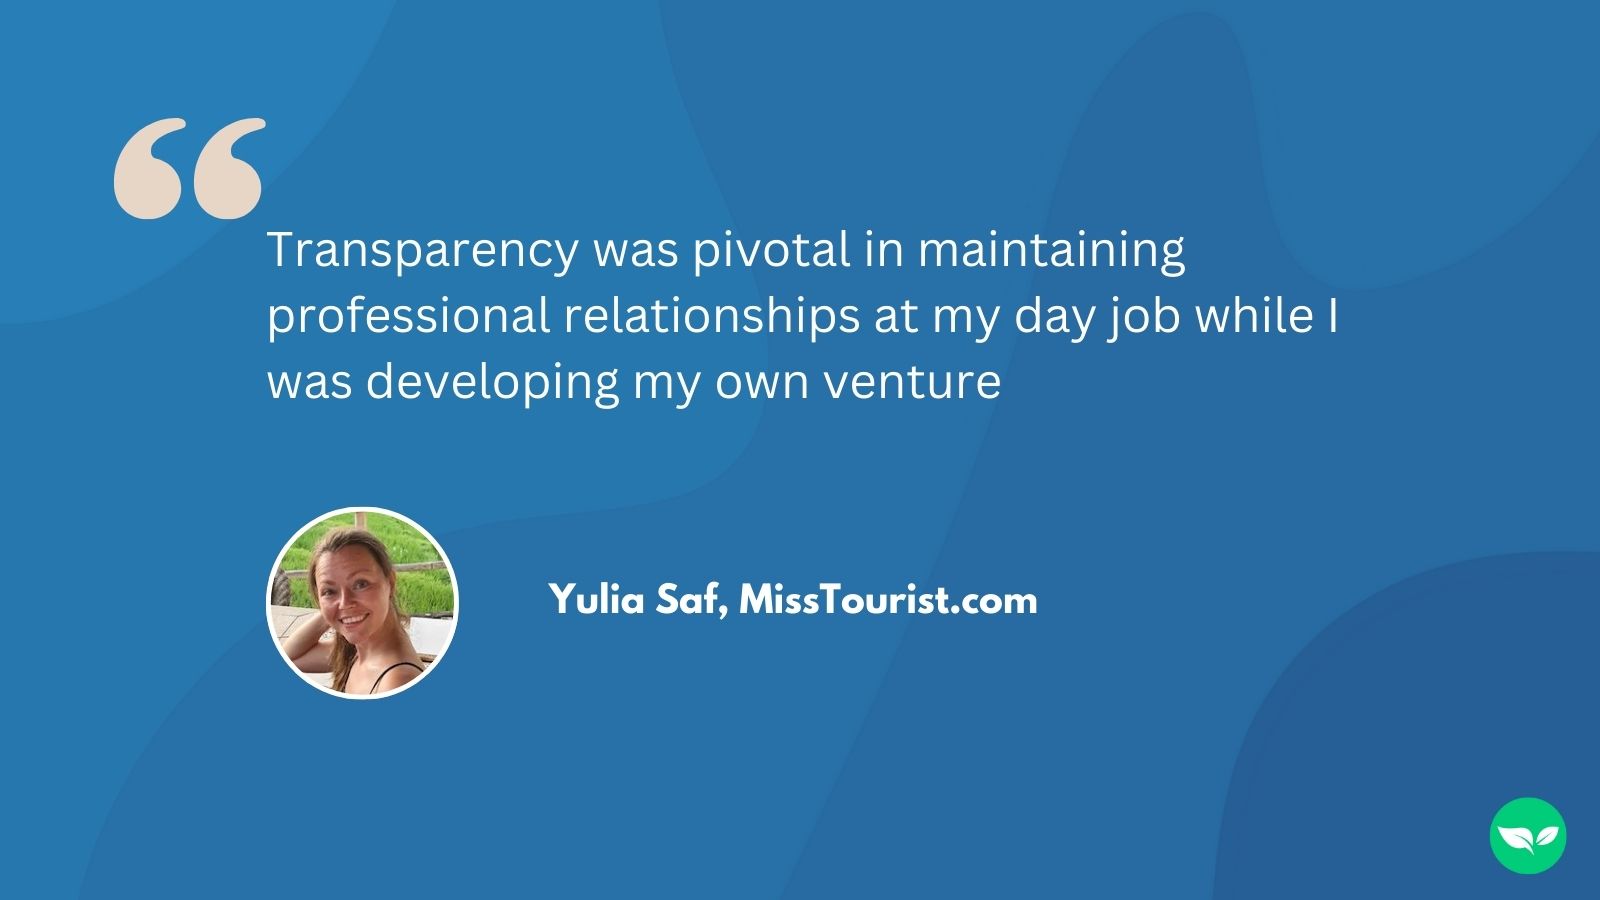 A graphic showing a quote from Yulia Saf